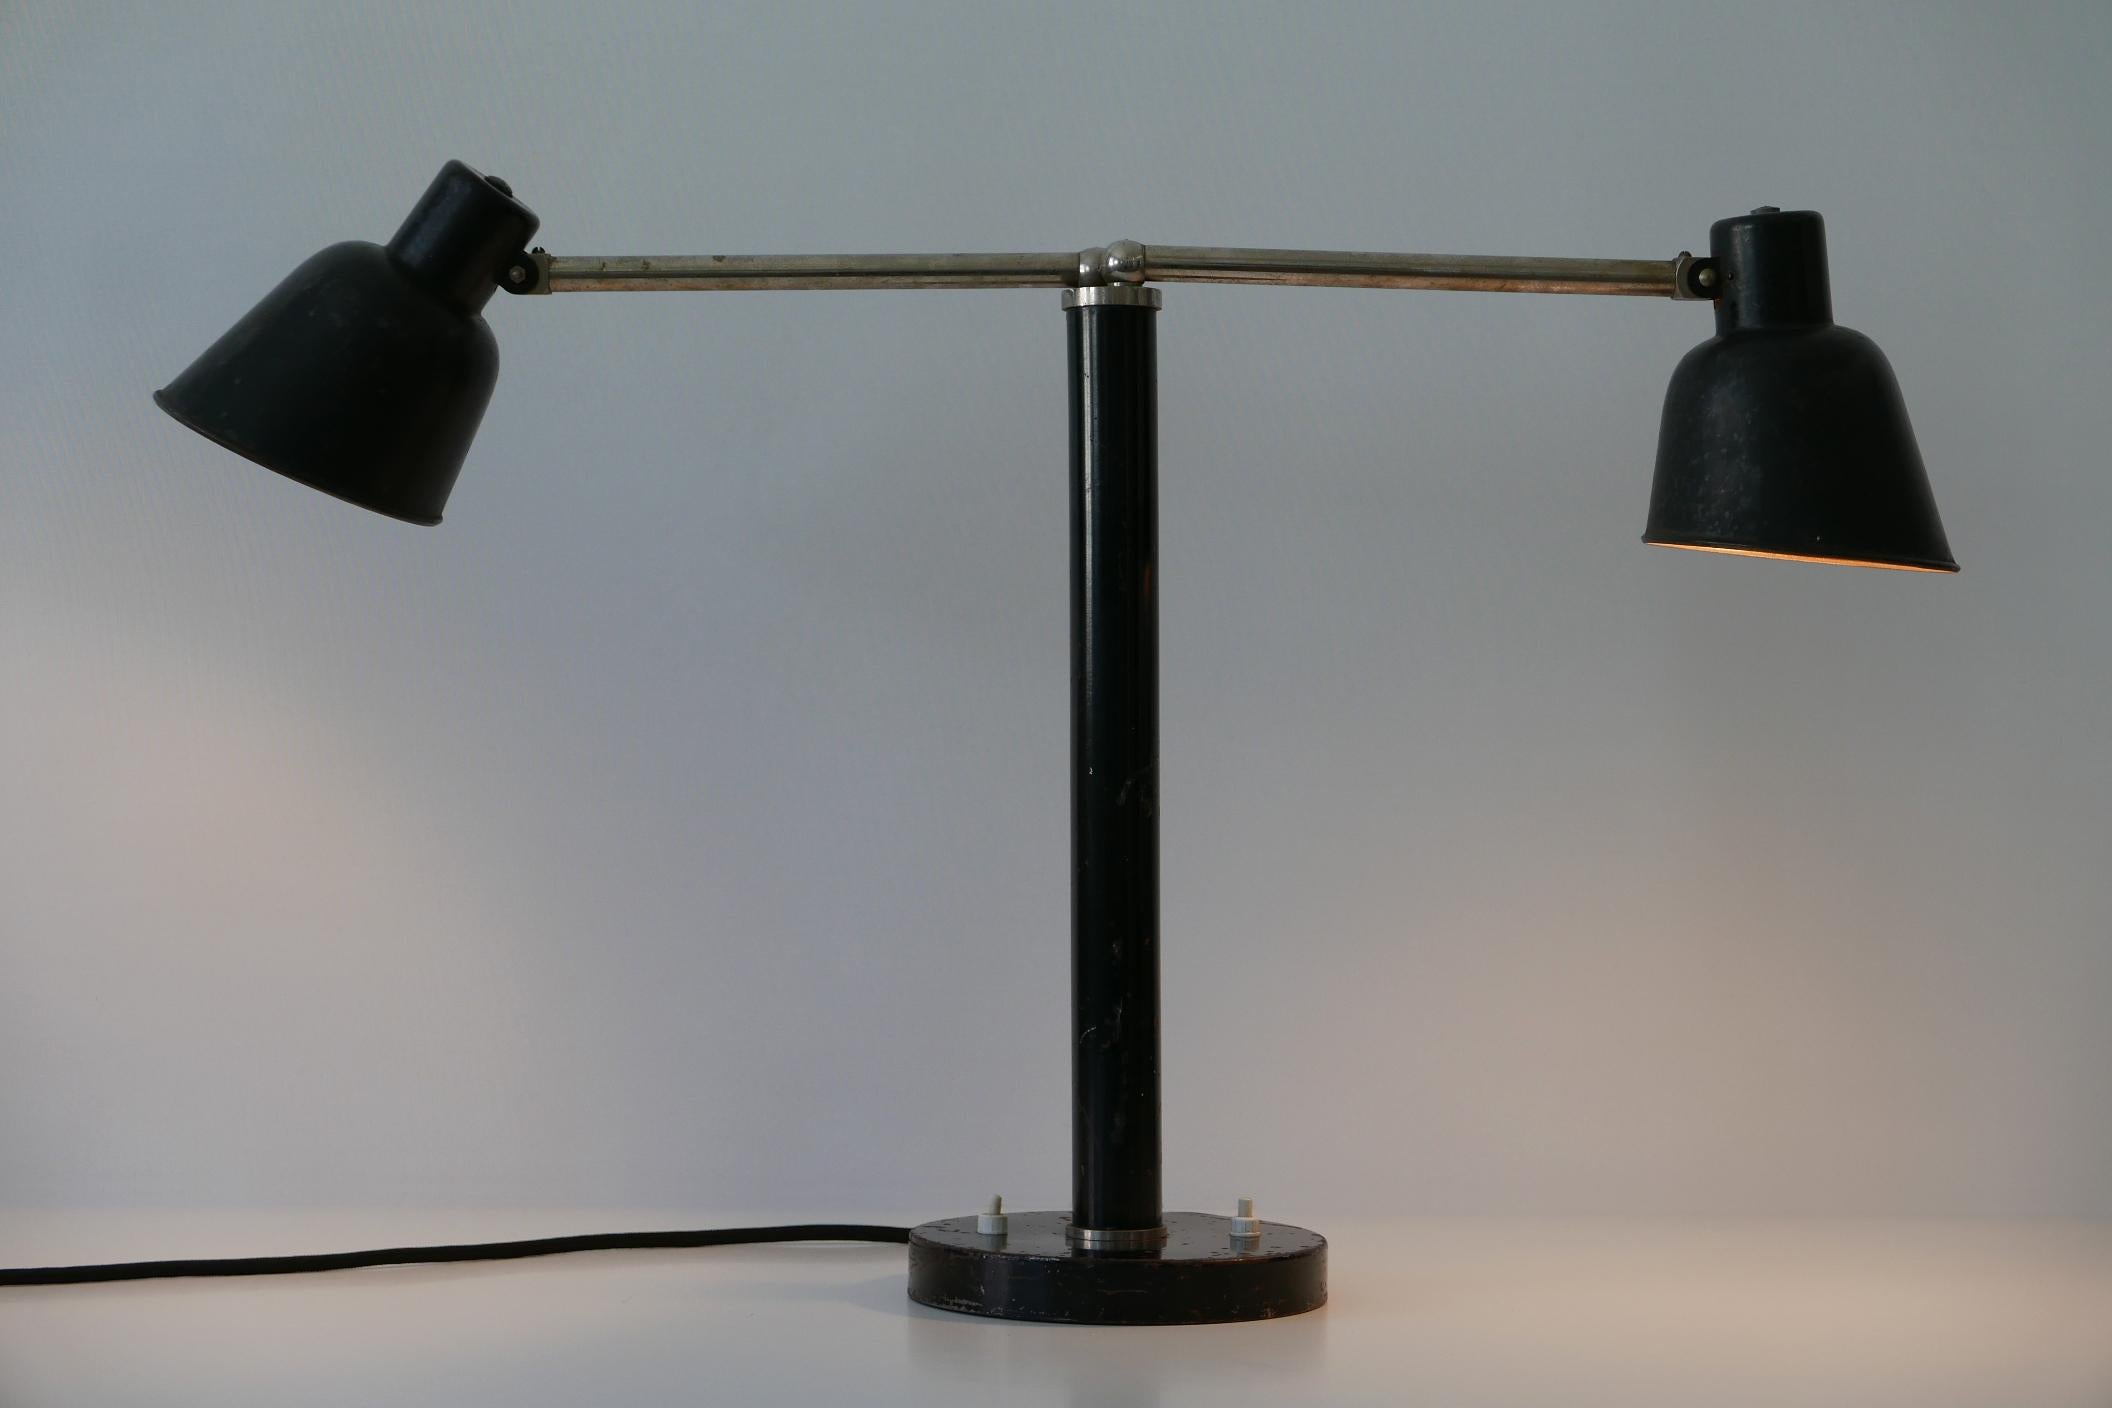 Extremely rare, two-armed Bauhaus / Modernist table lamp with adjustable arms and shades. Designed by Christian Dell for Bünte & Remmler (BuR), 1930s, Germany.

Executed in black enameled and partly nickel-plated metal, the lamp needs 2 x E27 Edison